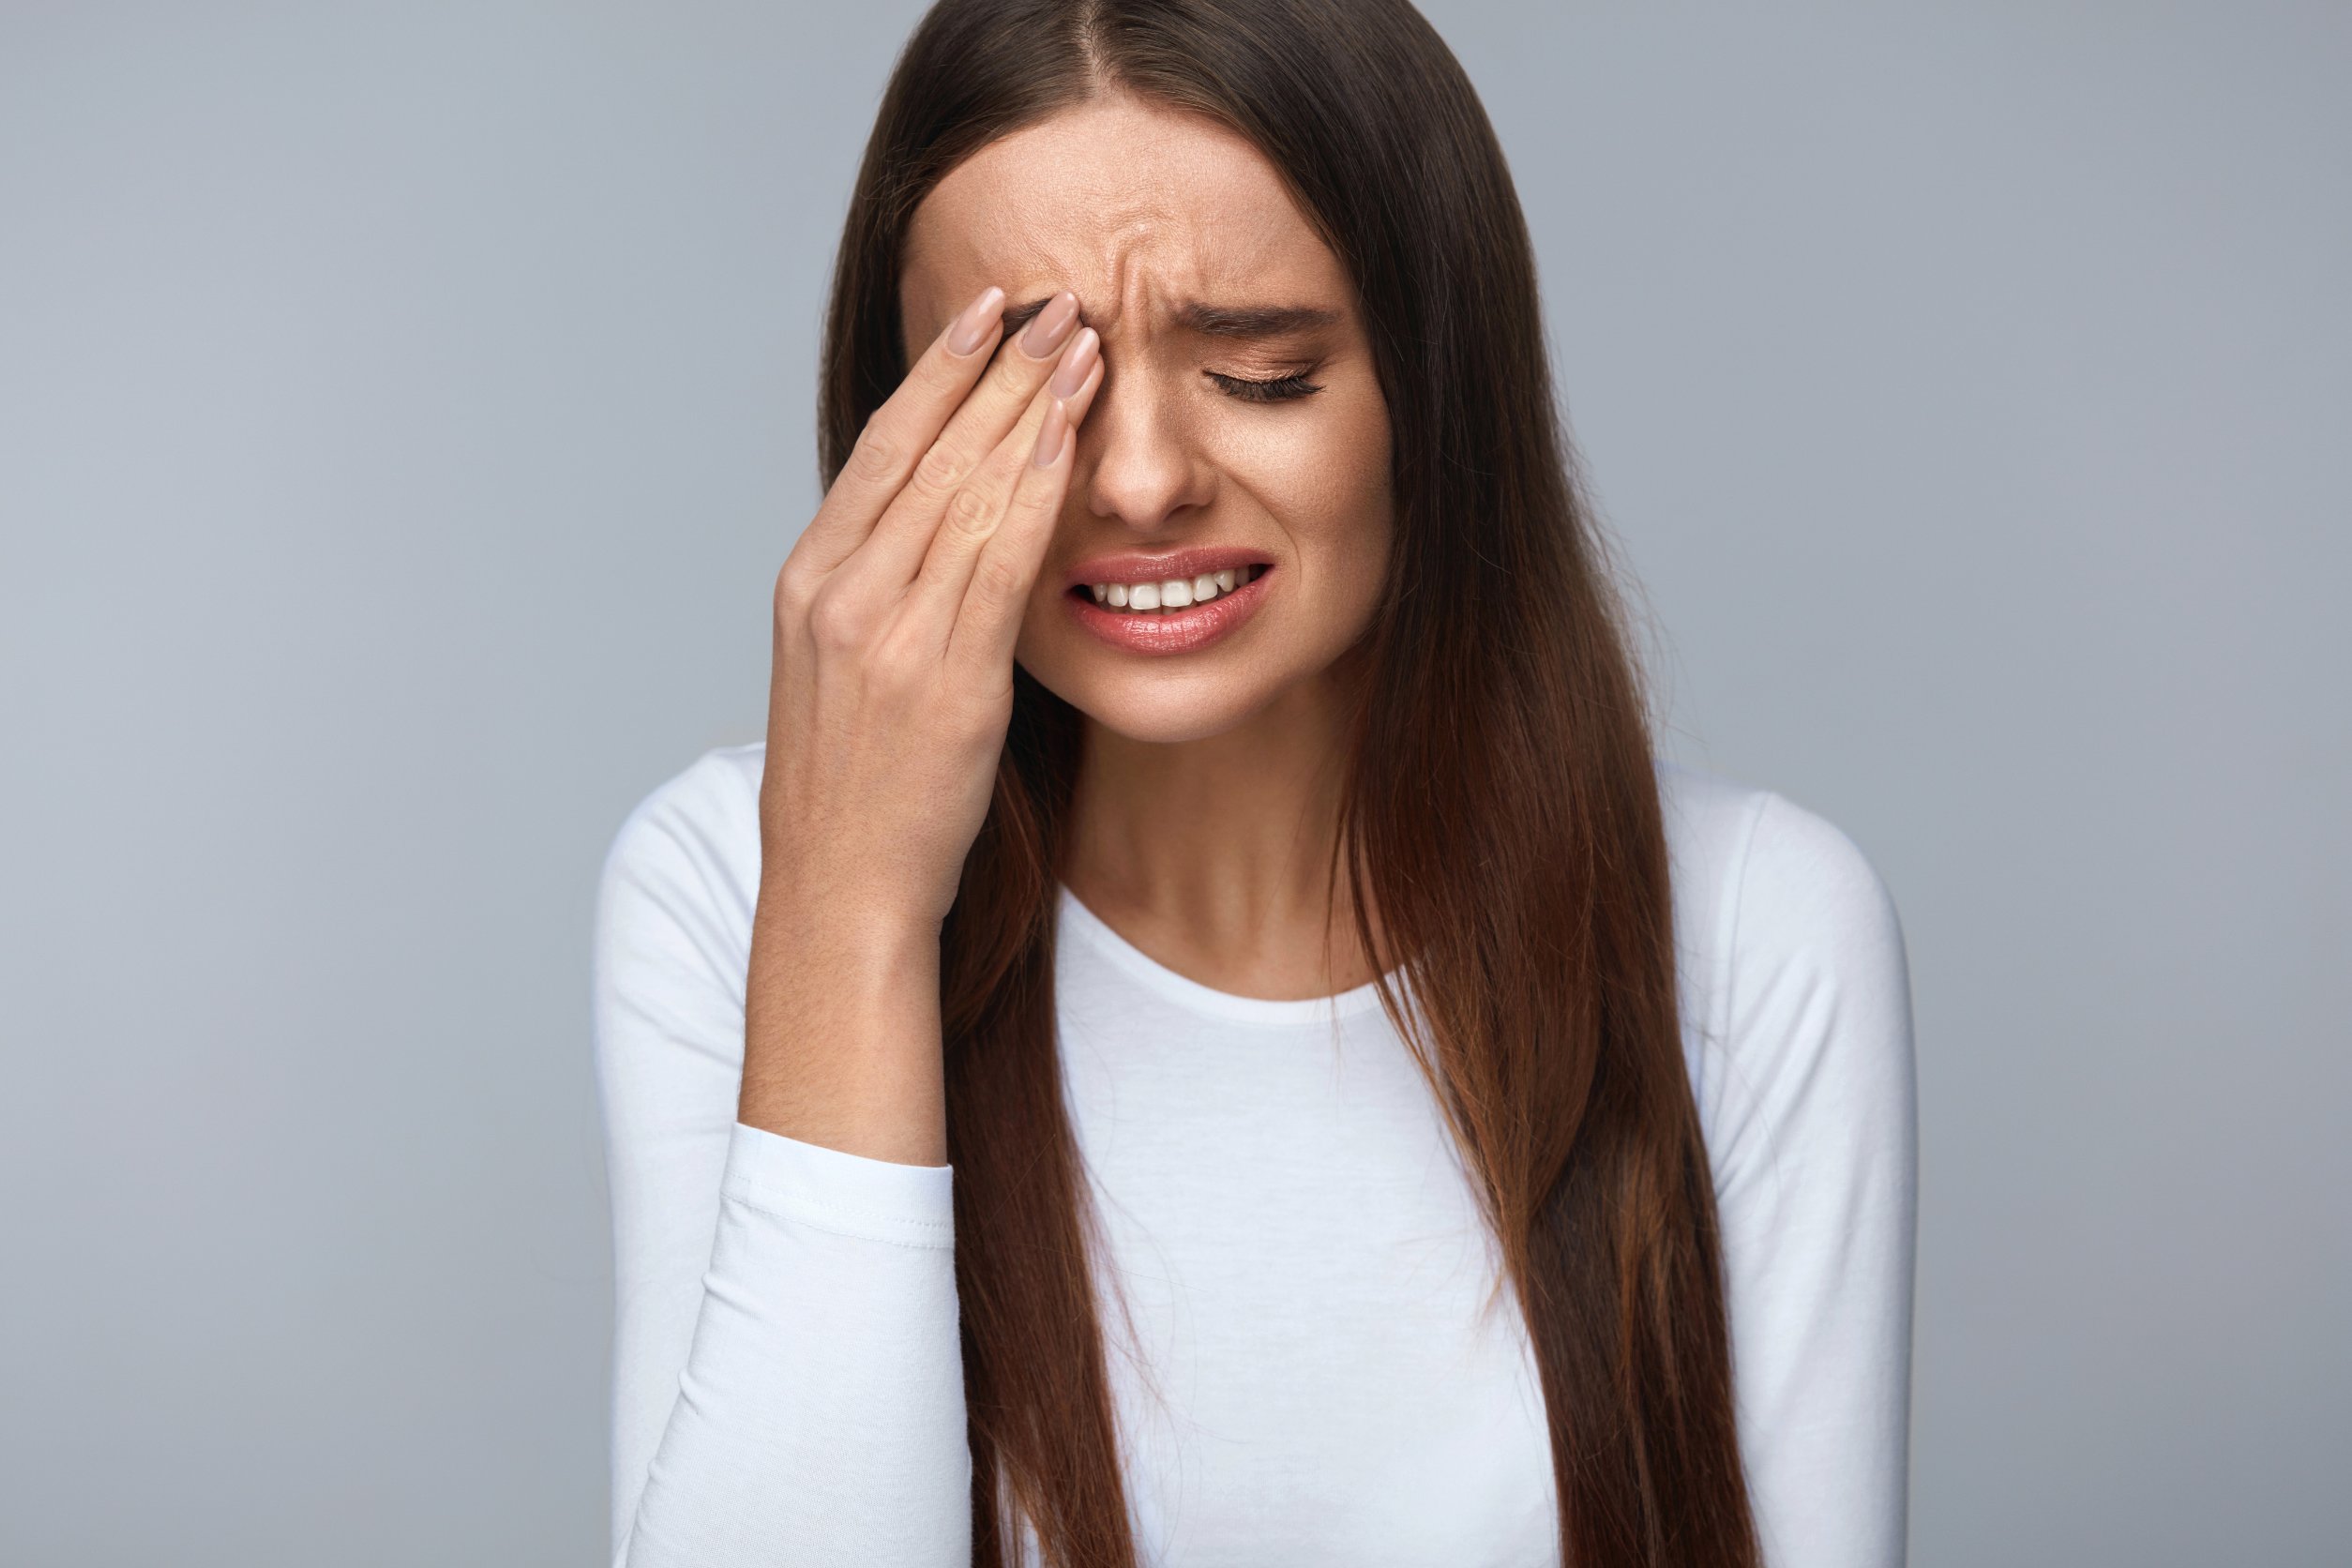 Top Causes of Sharp Pain in the Eye